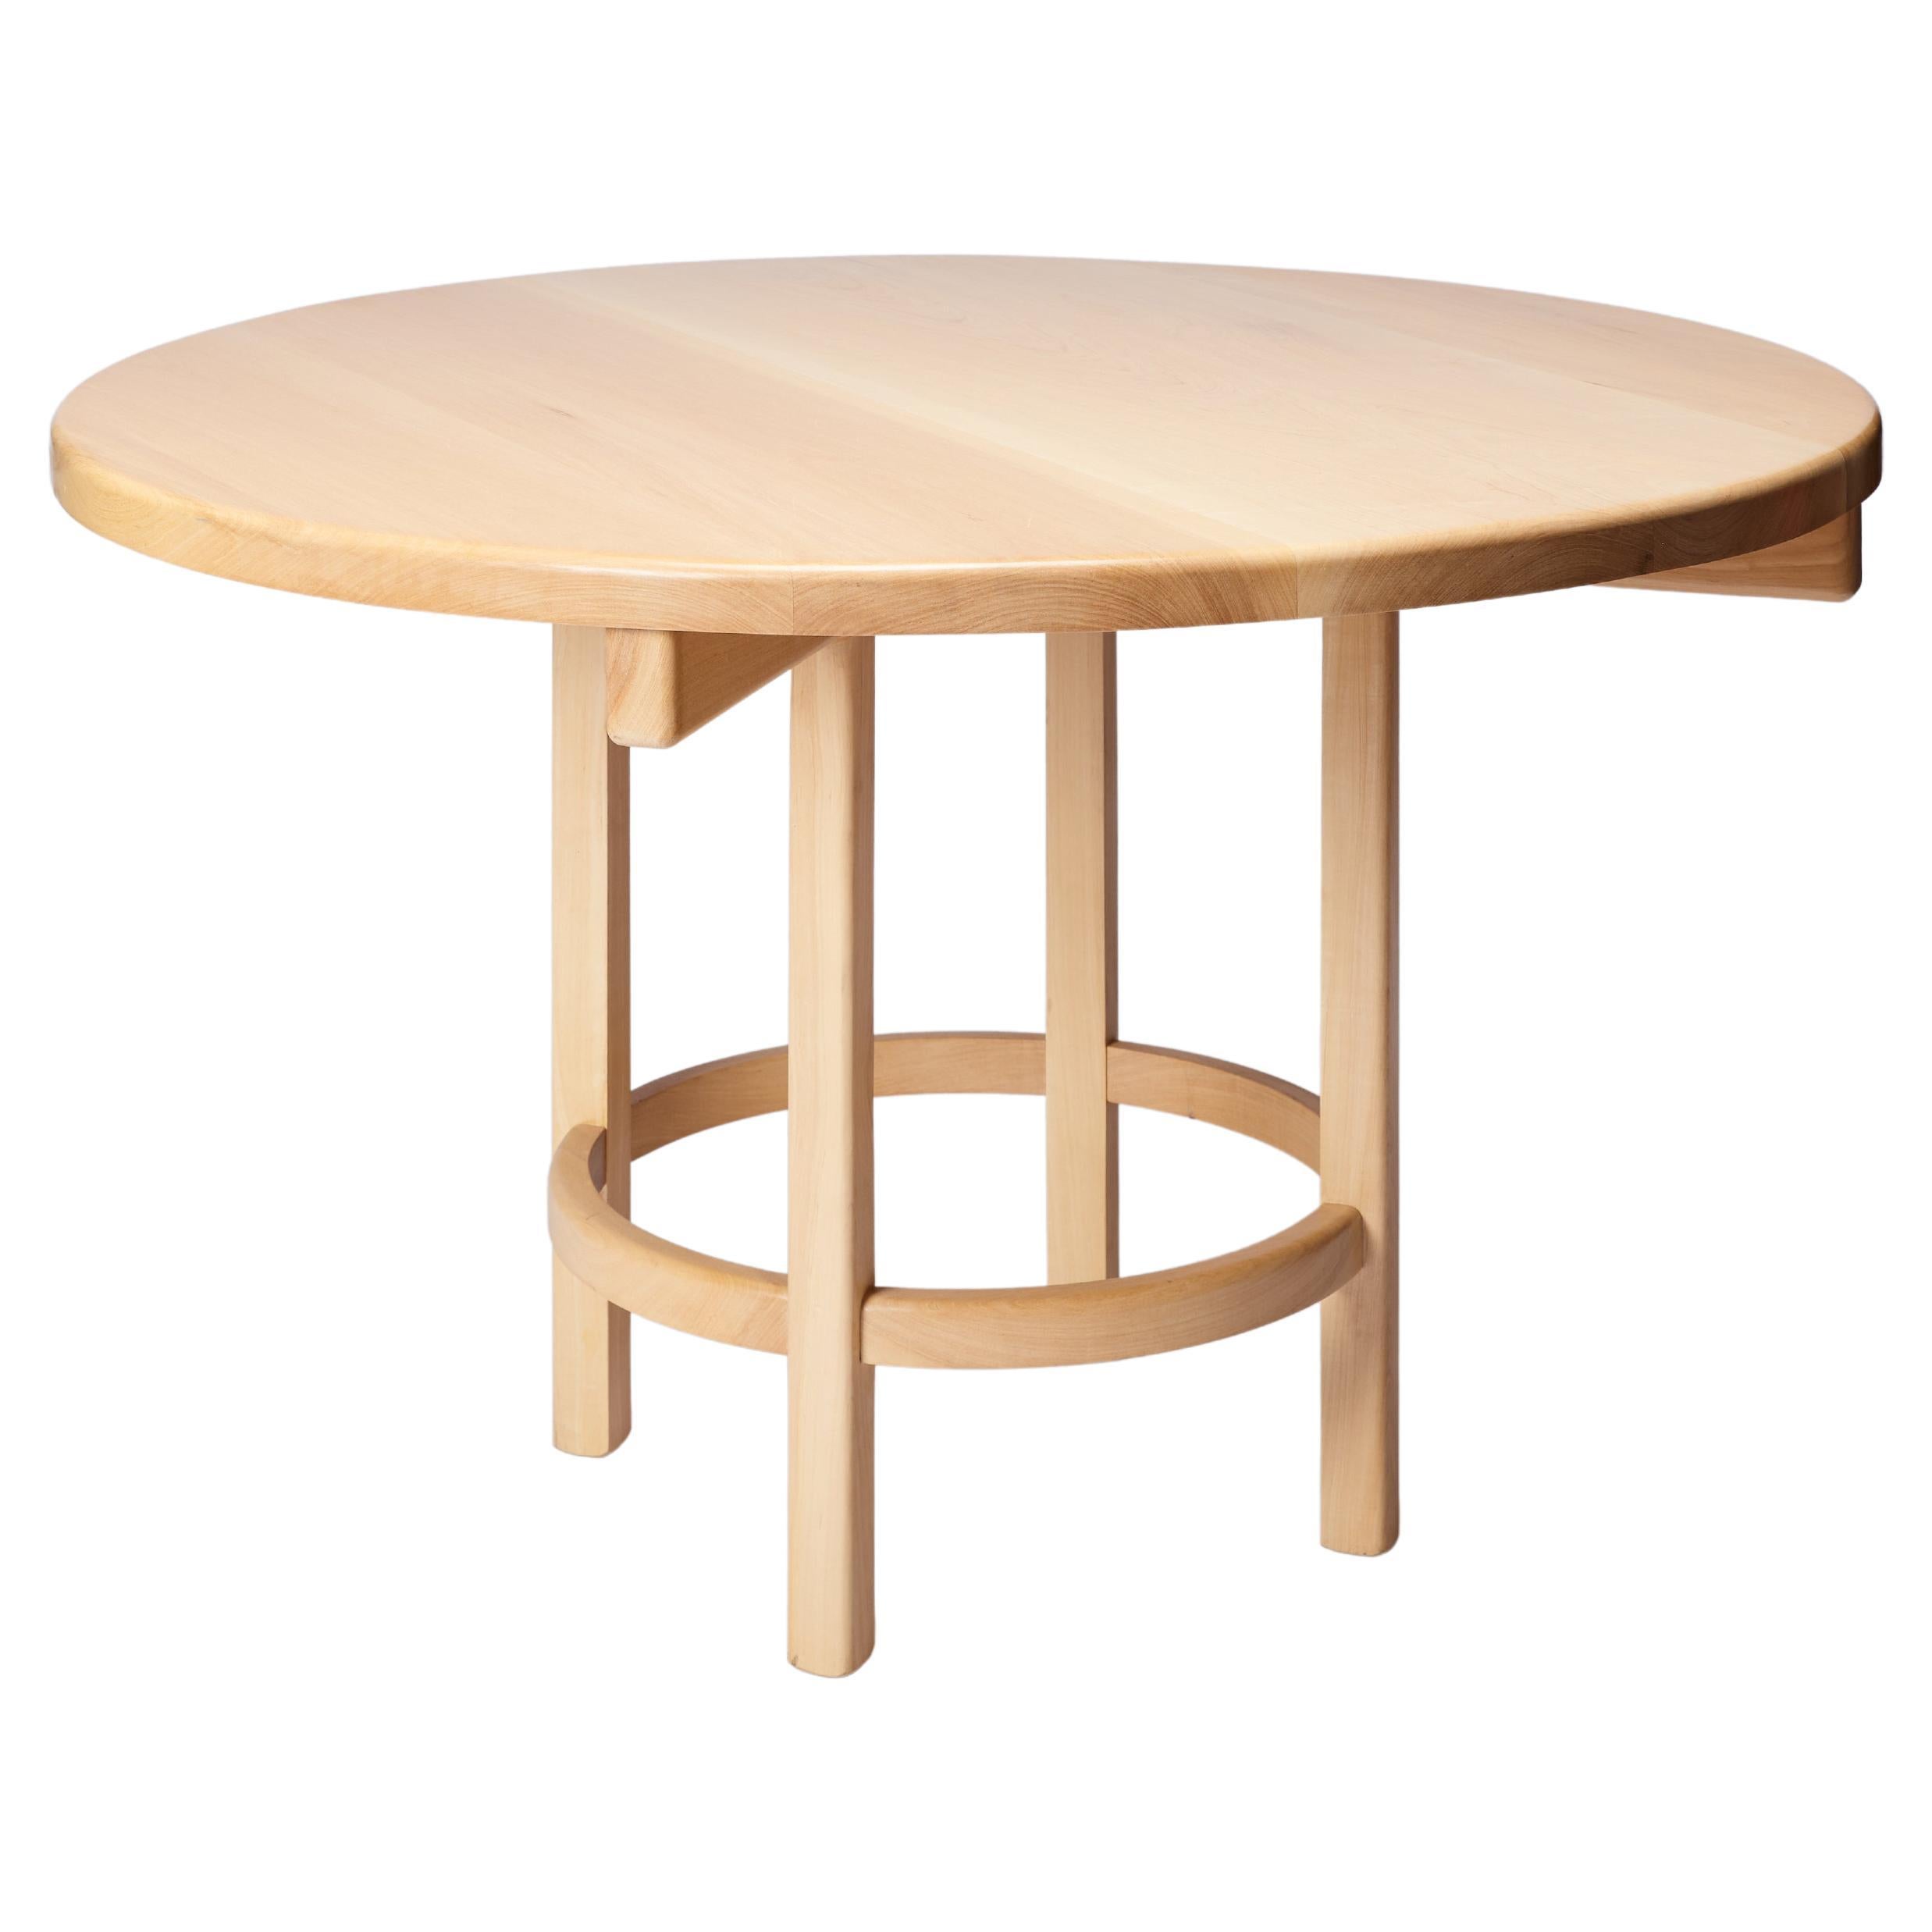 ORNO Contemporary Round Dining Table in Solid Hardwood by Ries For Sale